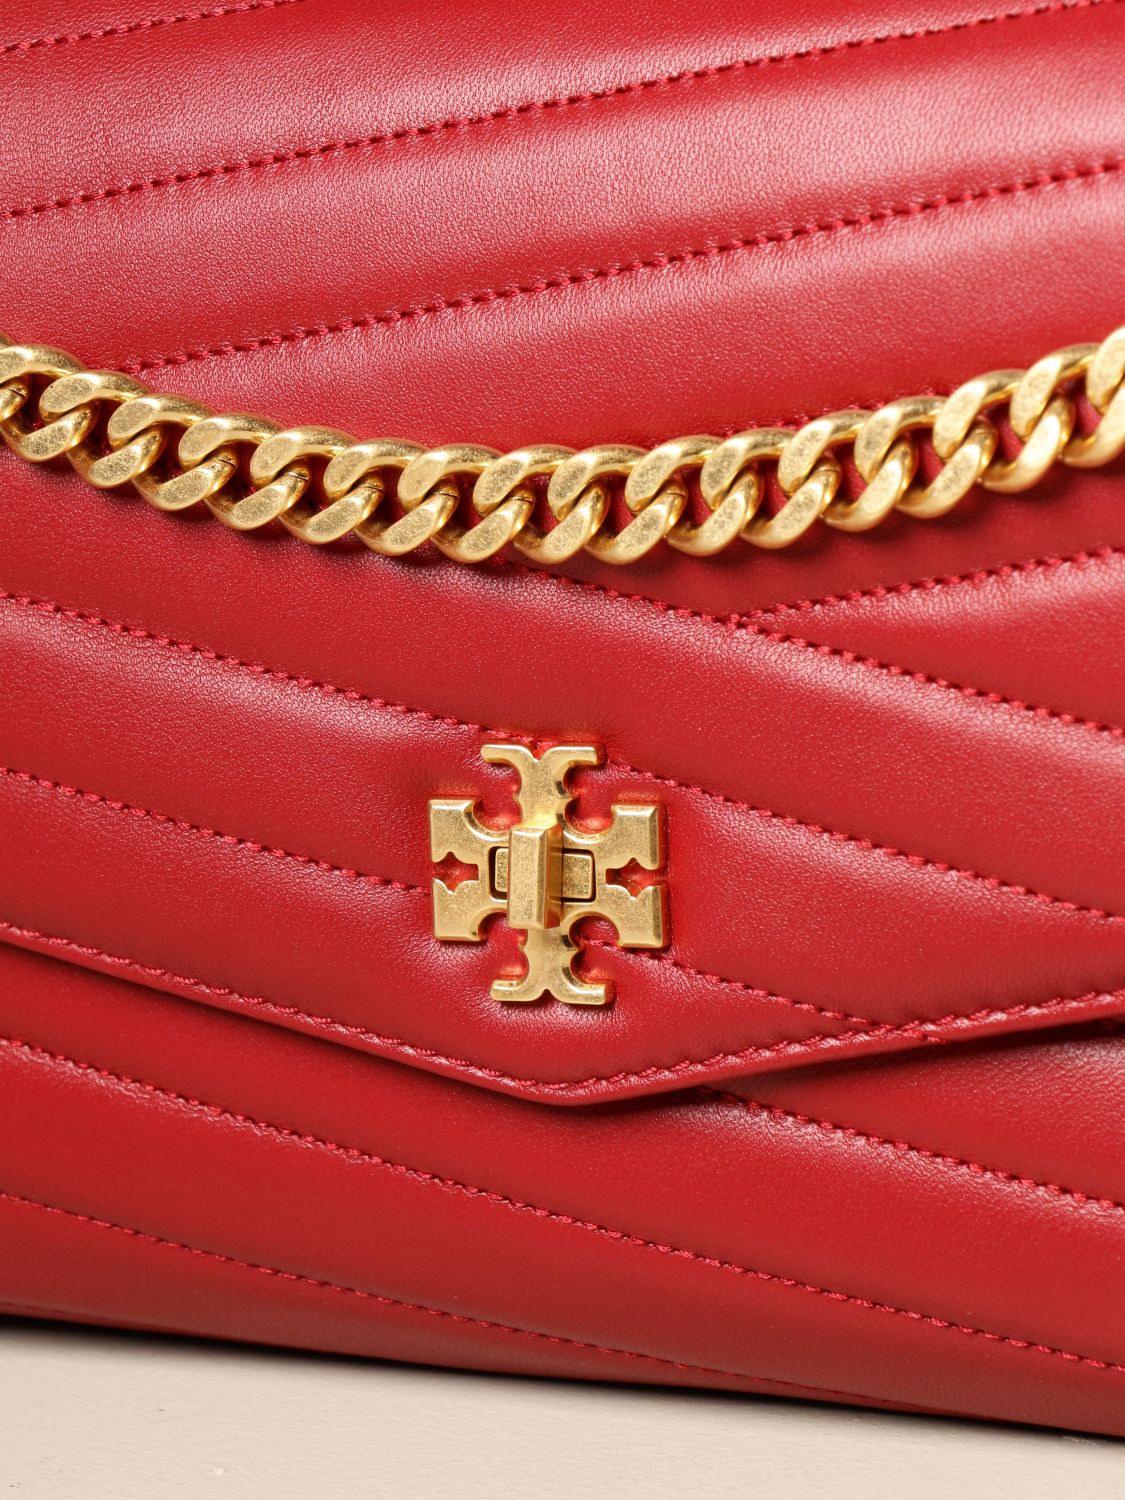 TORY BURCH: Kira bag in quilted nappa - Red | Tory Burch handbag 61674  online on 